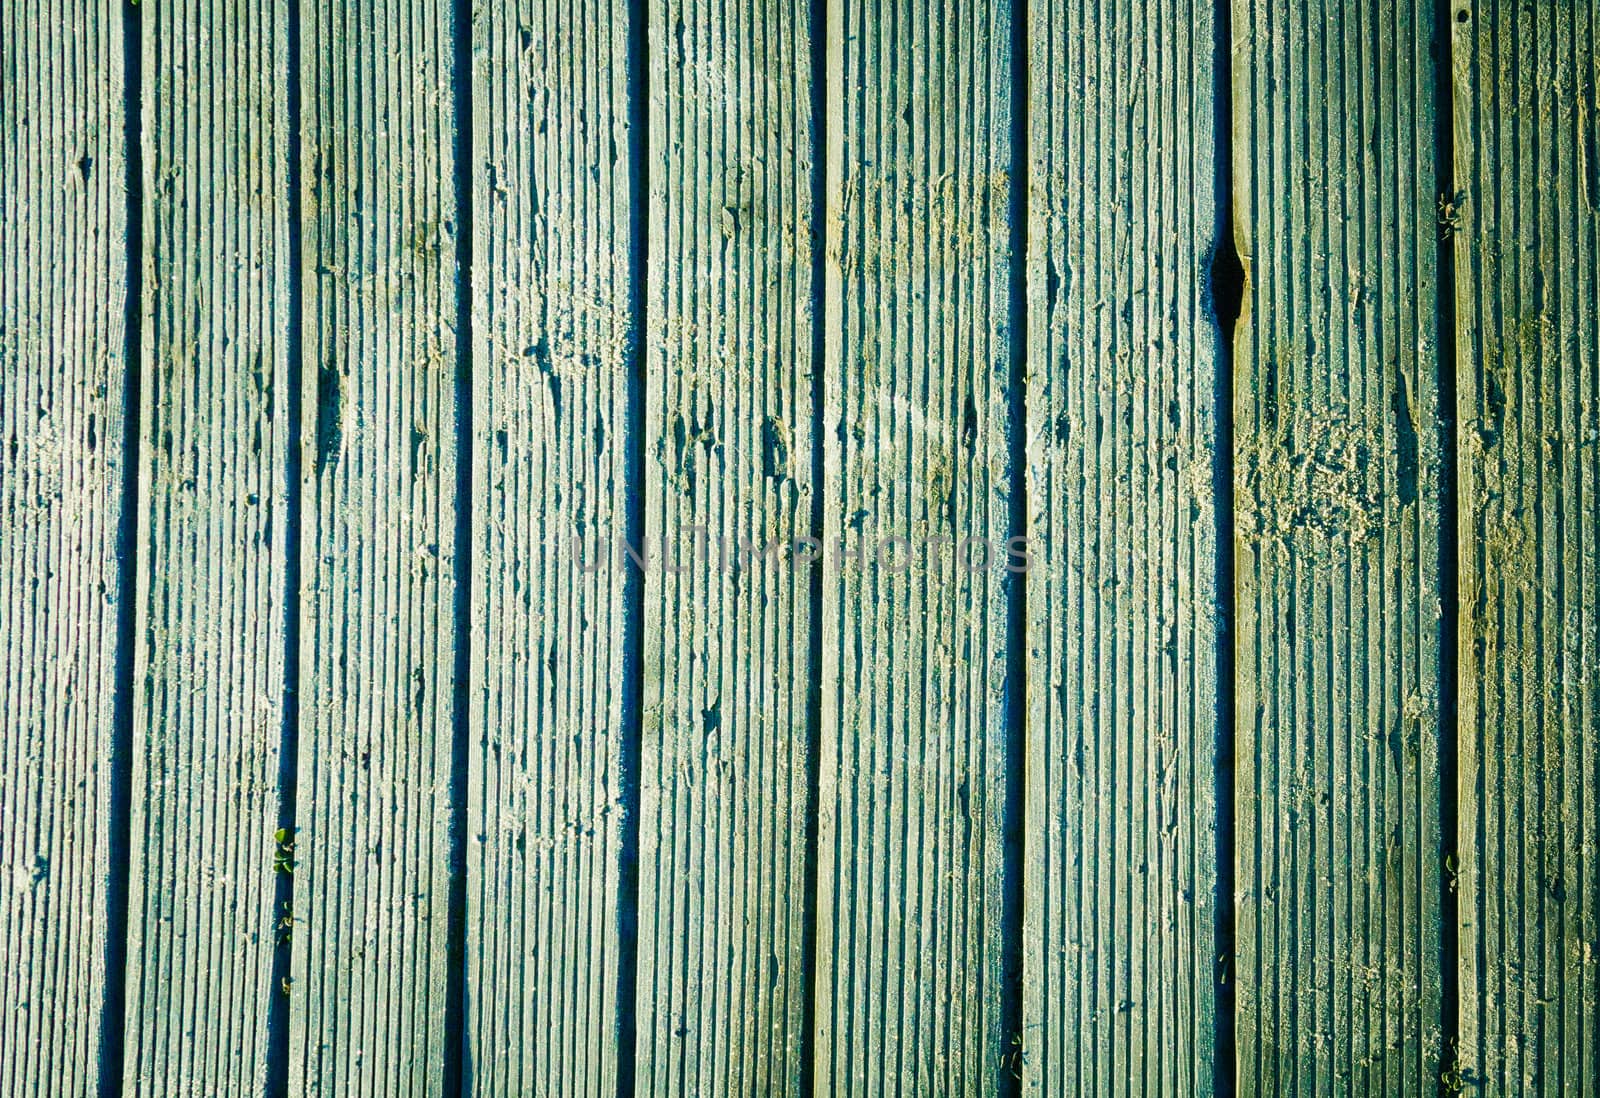 Natural green wood planks texture background